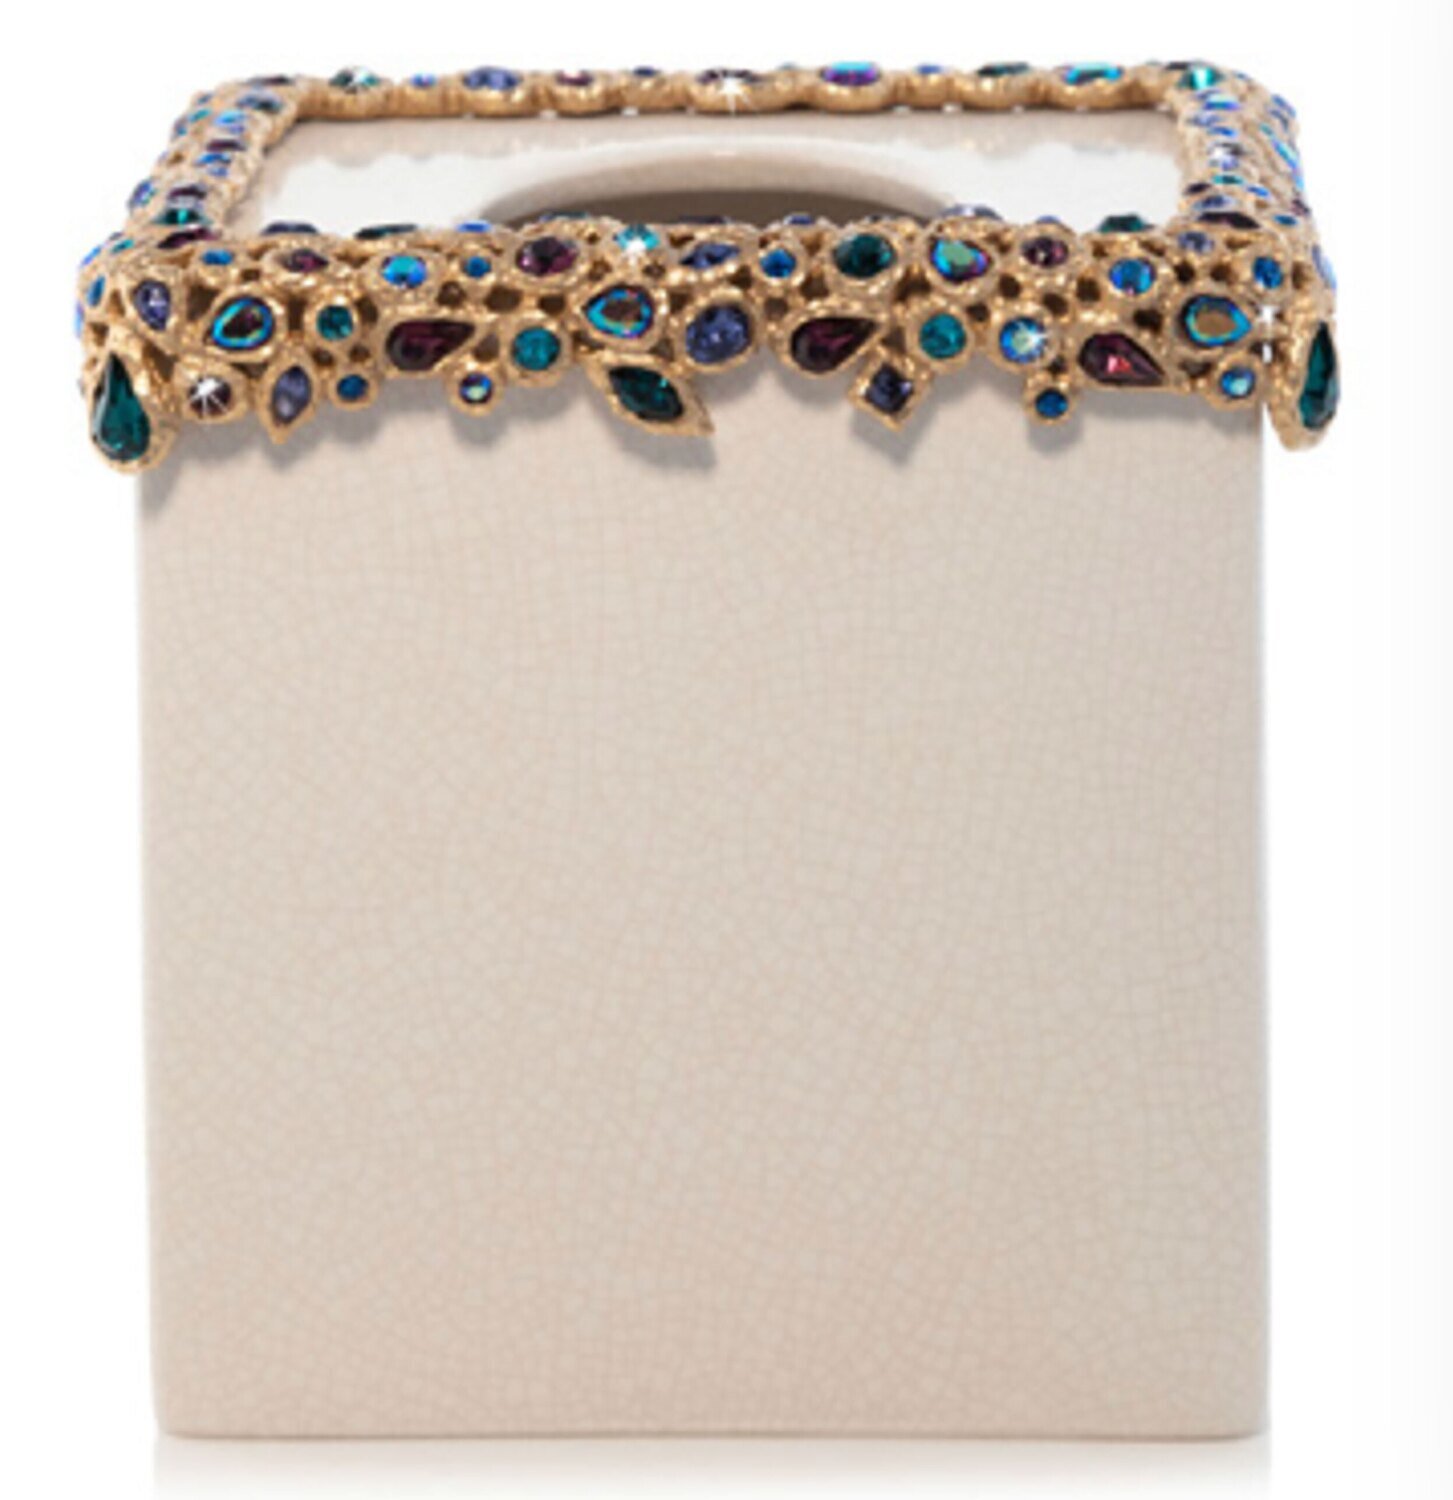 Jay Strongwater Emerson Bejeweled Tissue Box Peacock SDH8891-208